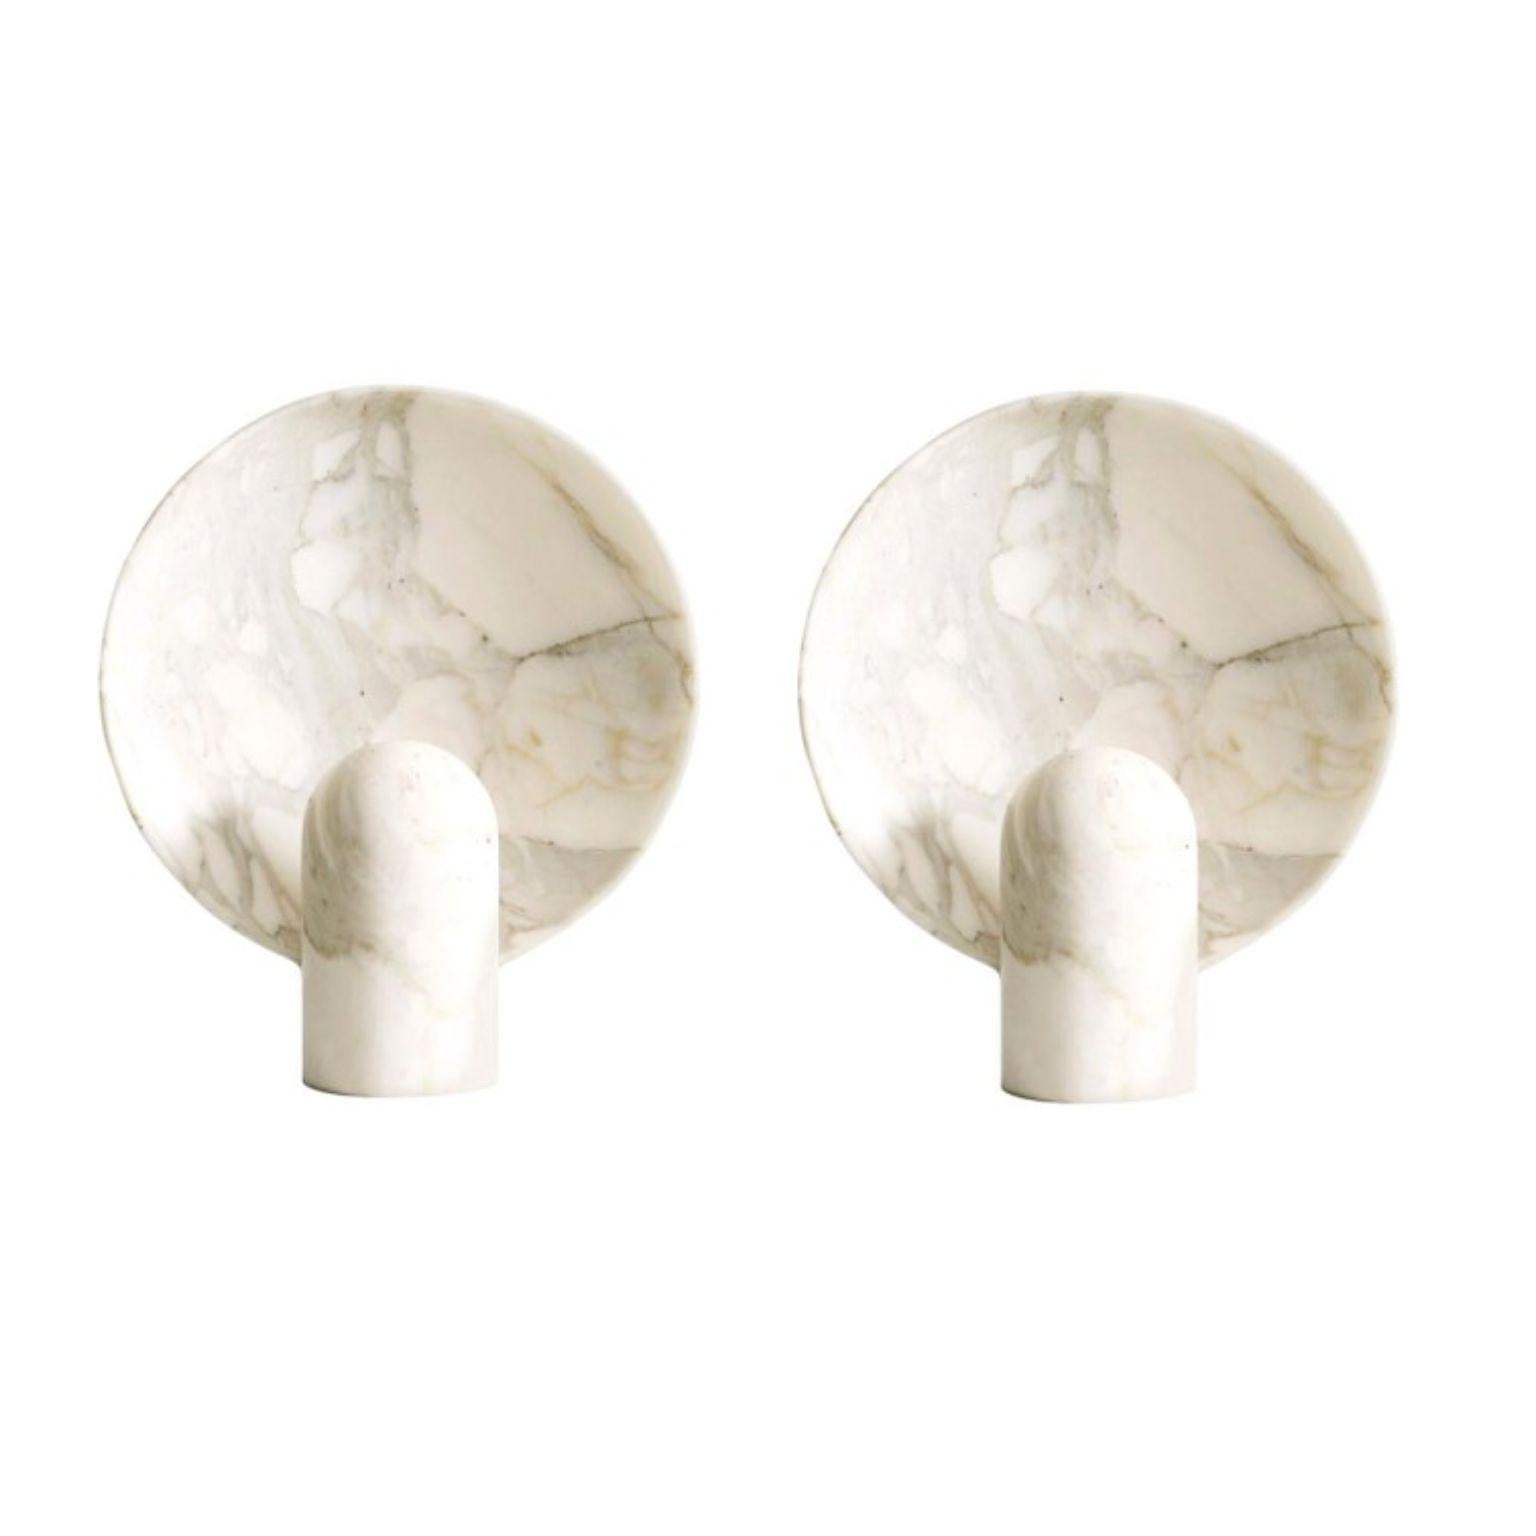 Set of 2 Calacatta Surface Sconces by Henry Wilson
Dimensions. W 30 x D 11 x H 35 cm
Materials: Calacatta Marble

This sculptural item is handmade in Sydney Australia.

The surface sconce in Calacatta marble is an ambient, sculptural light carved in